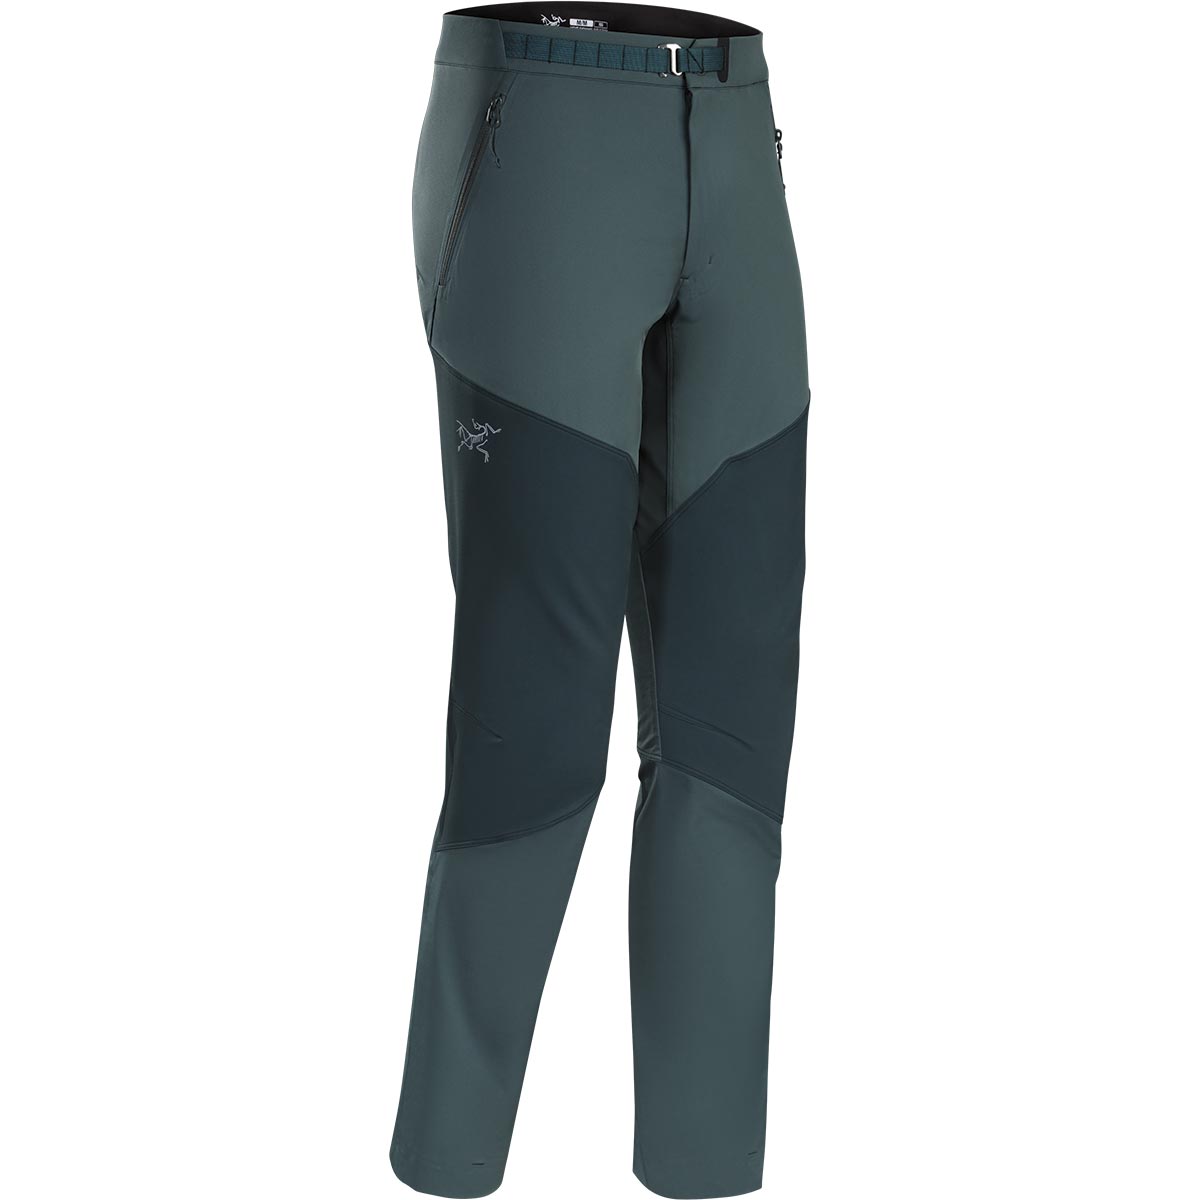 Arc'teryx Pant, men's, 2017 (free ground shipping) :: Pants, Trail :: Pants and shorts :: Clothing :: Moontrail